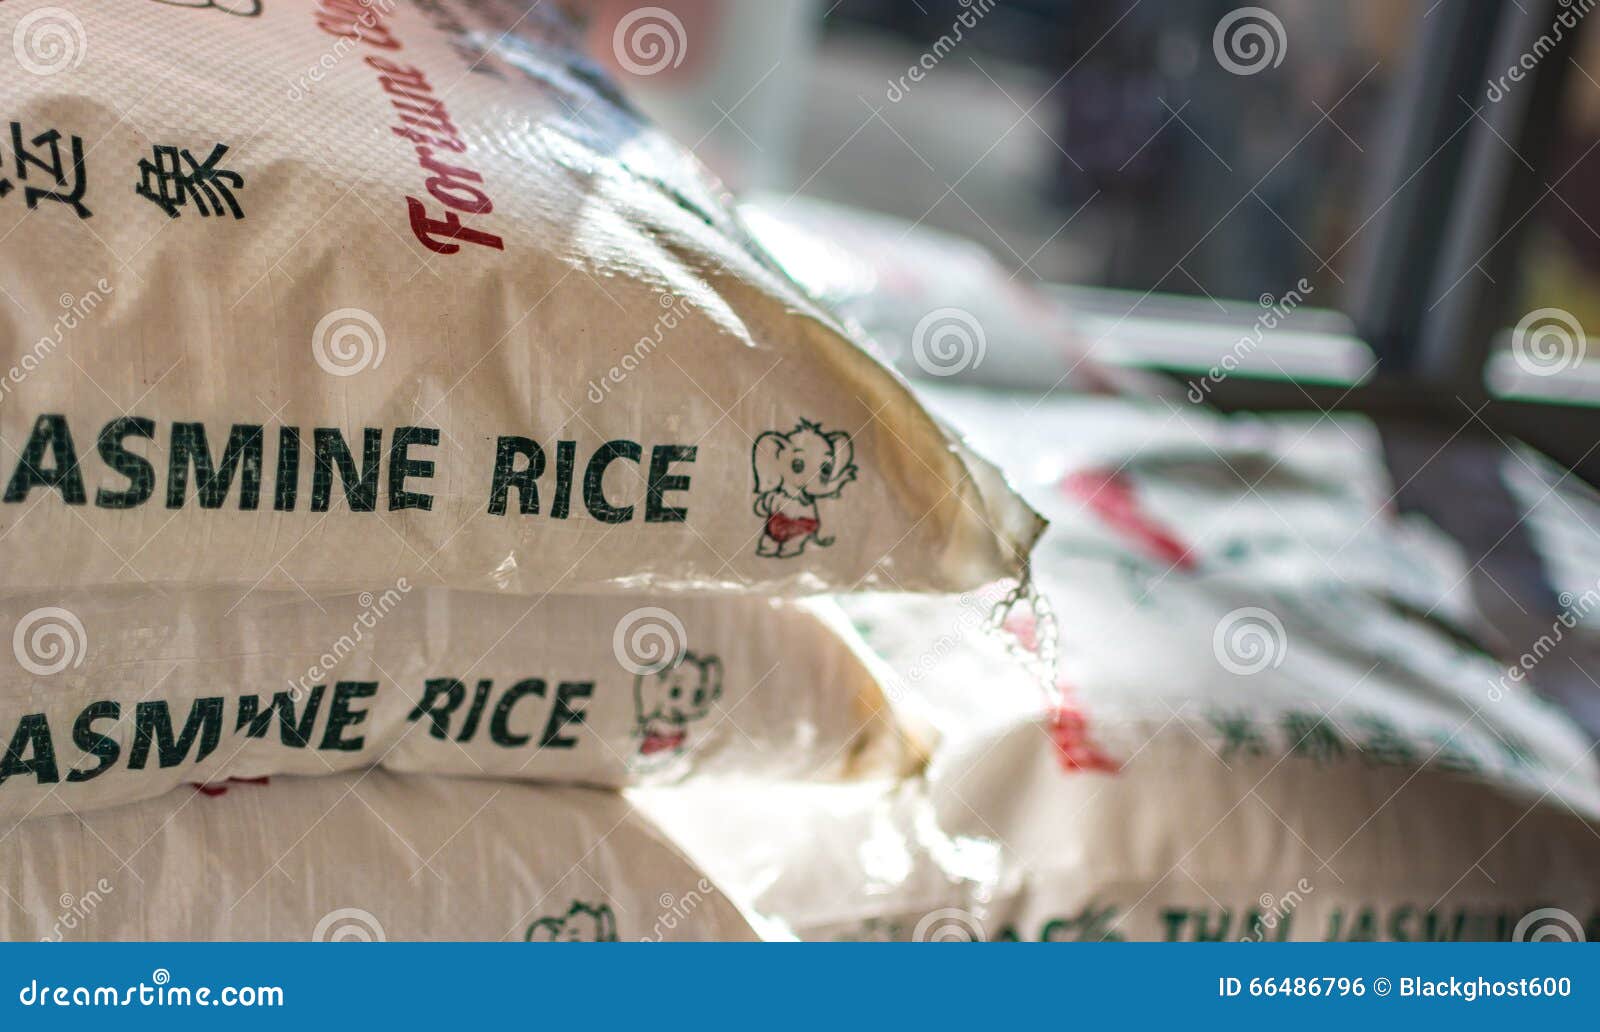 Details more than 73 large bags of rice latest - in.duhocakina